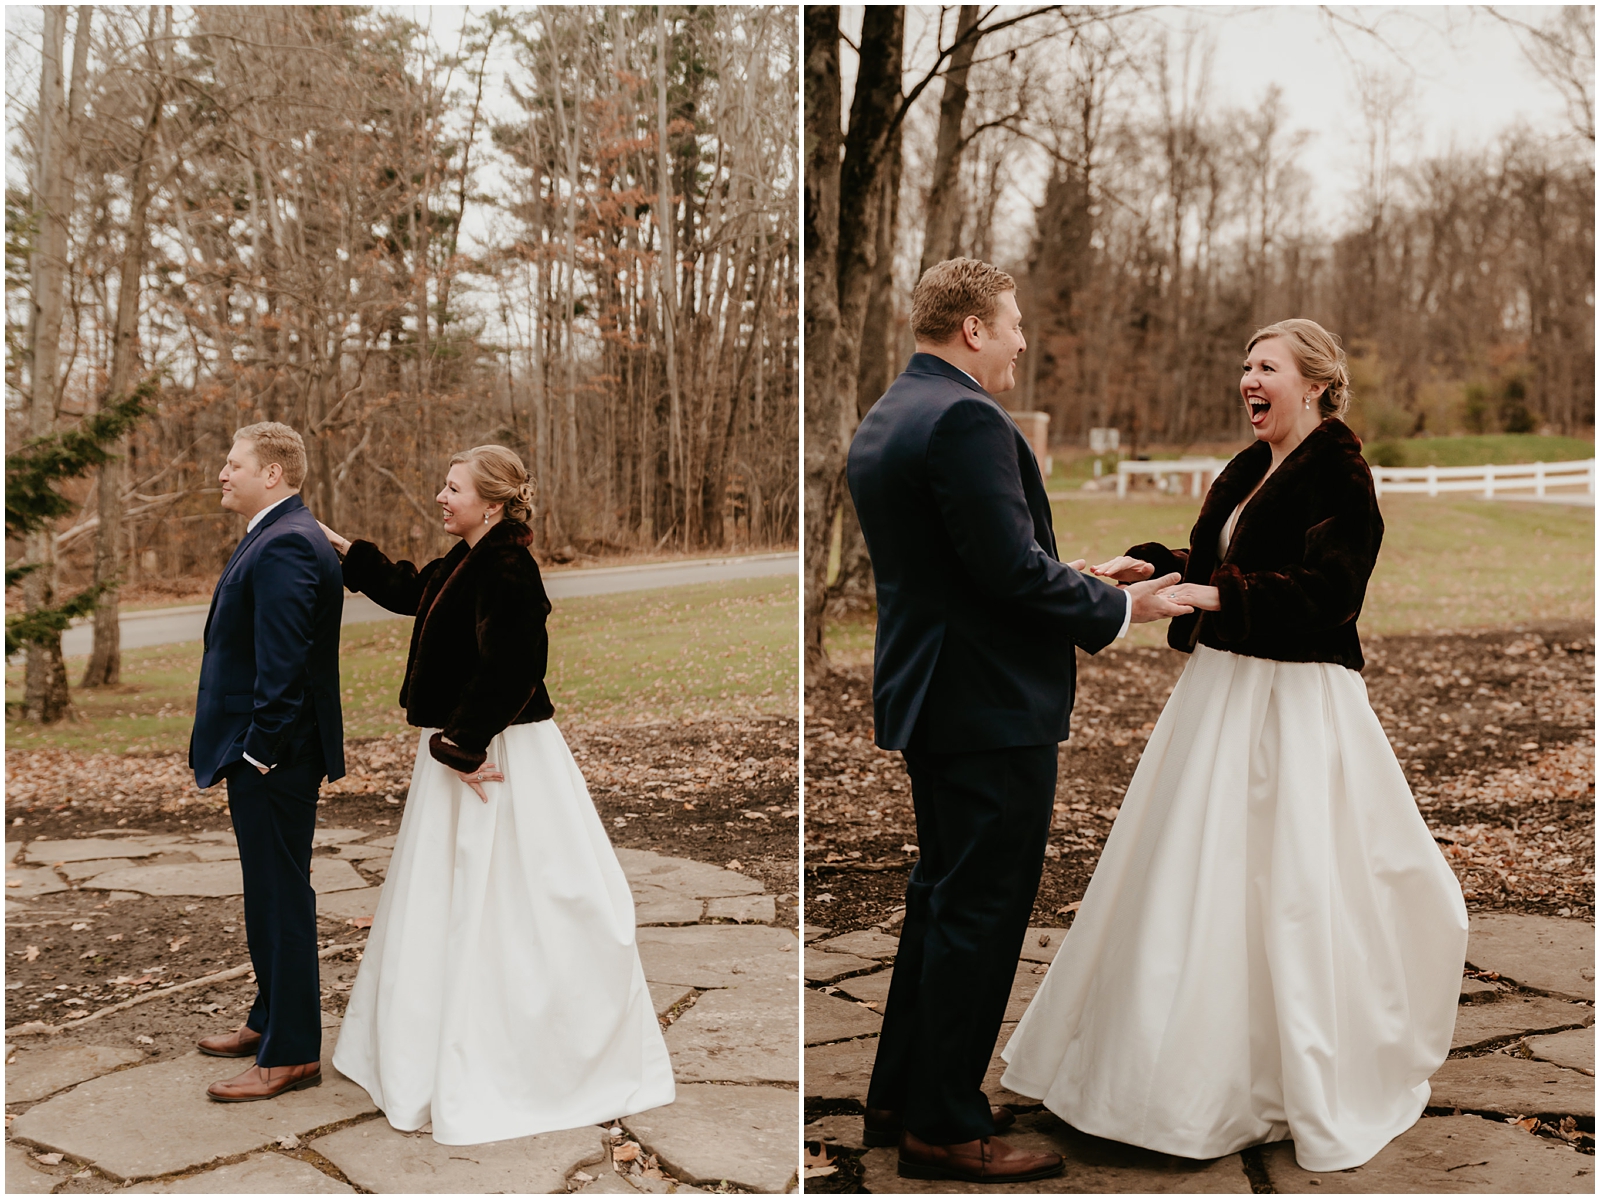 Bride and groom portraits at The Tanglewood Club